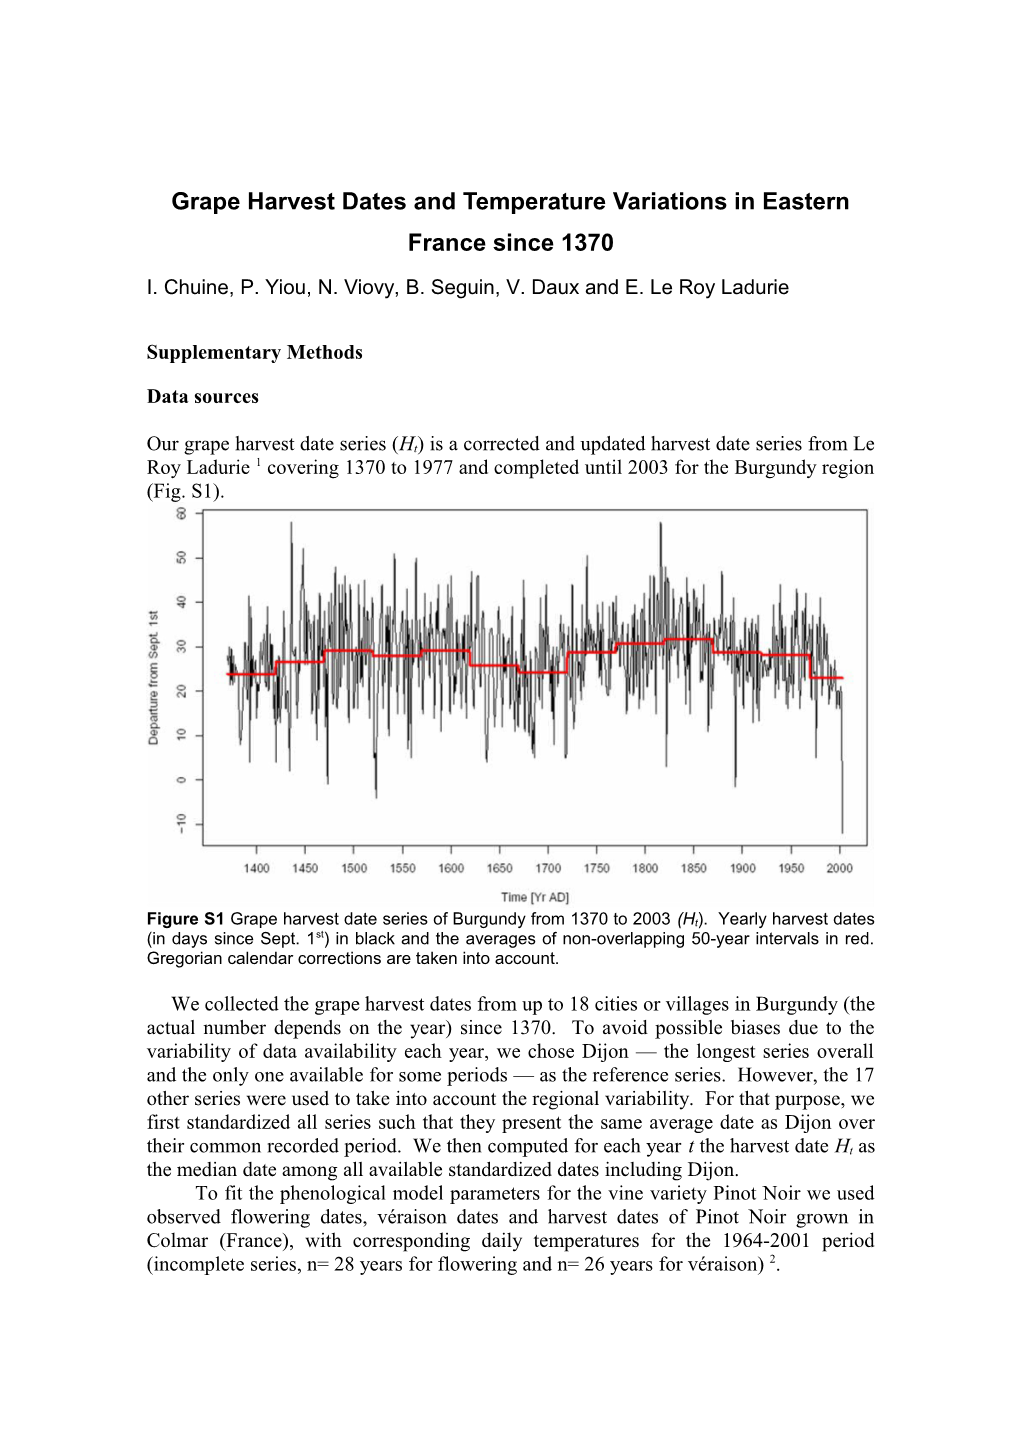 Grape Harvest Dates and Temperature Variations in Eastern France Since 1370